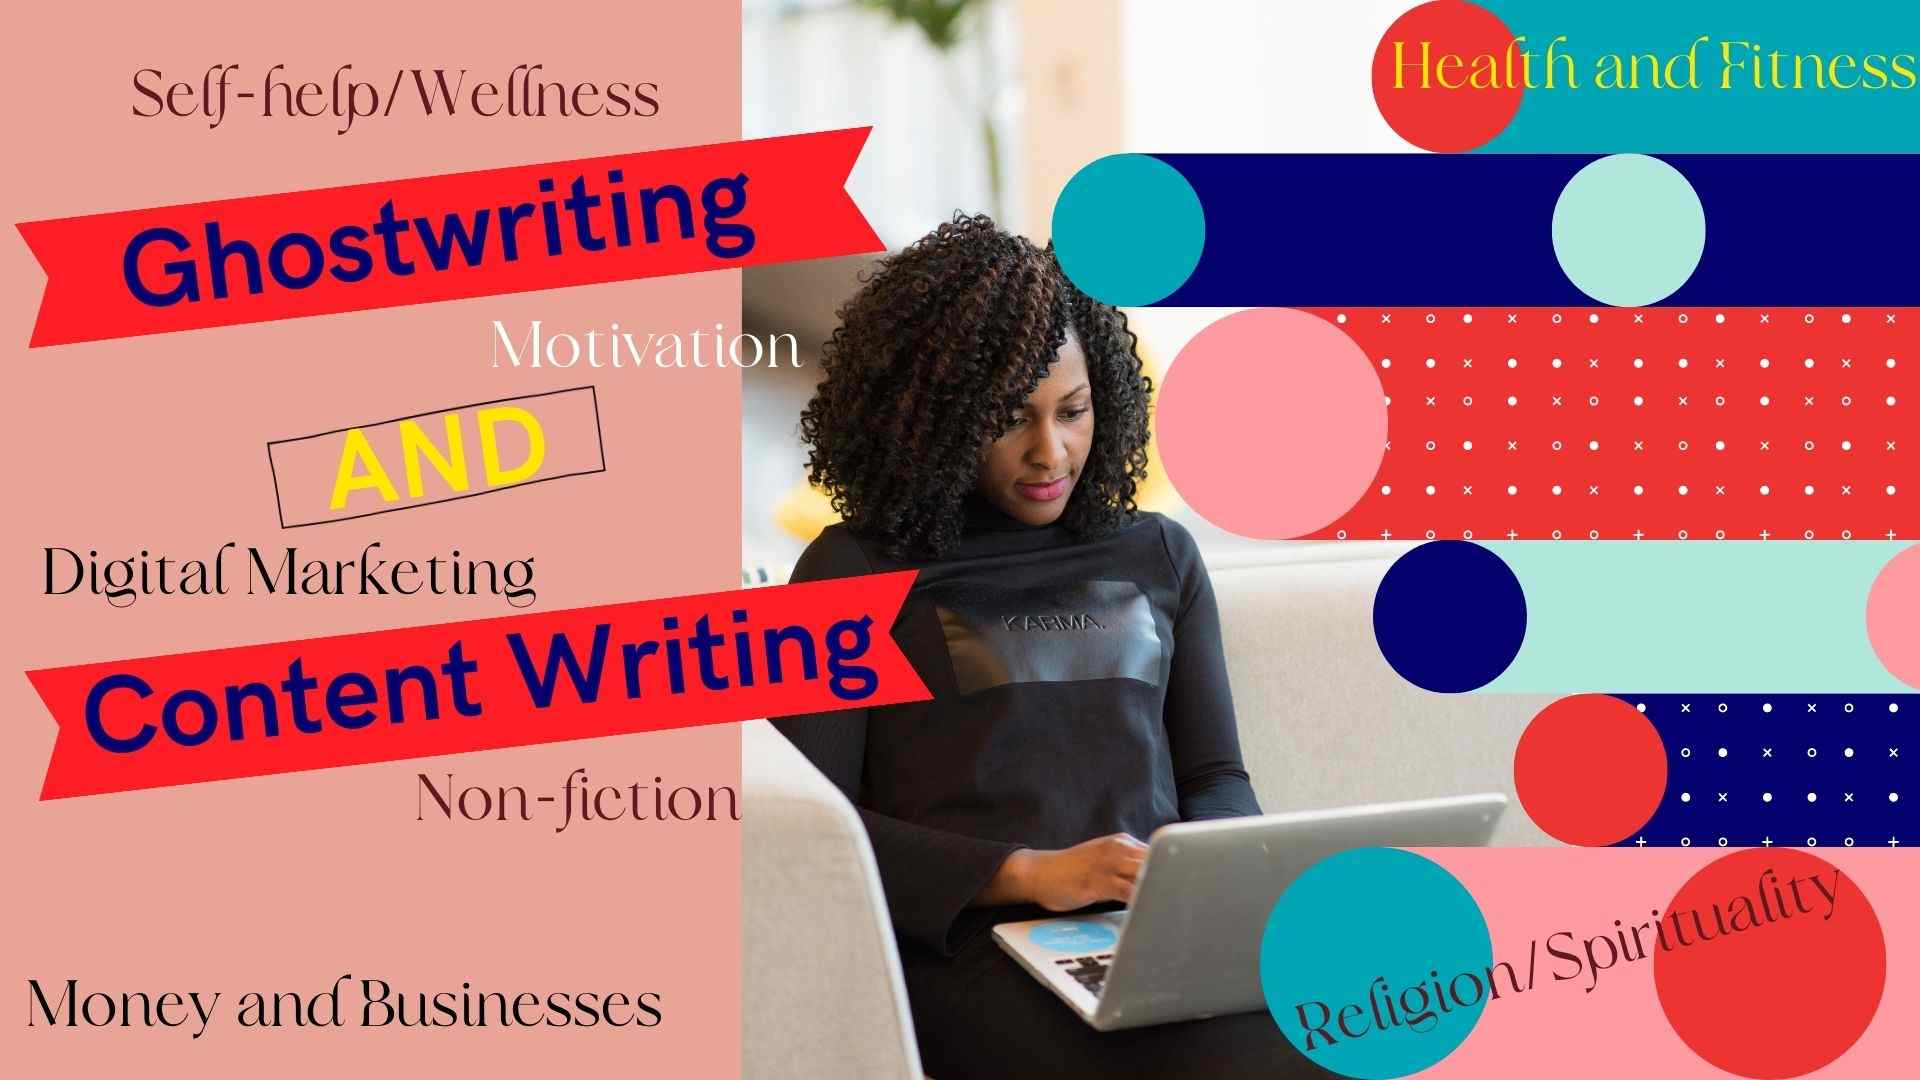 I will be your ghostwriter and content writer – plagiarism-free content